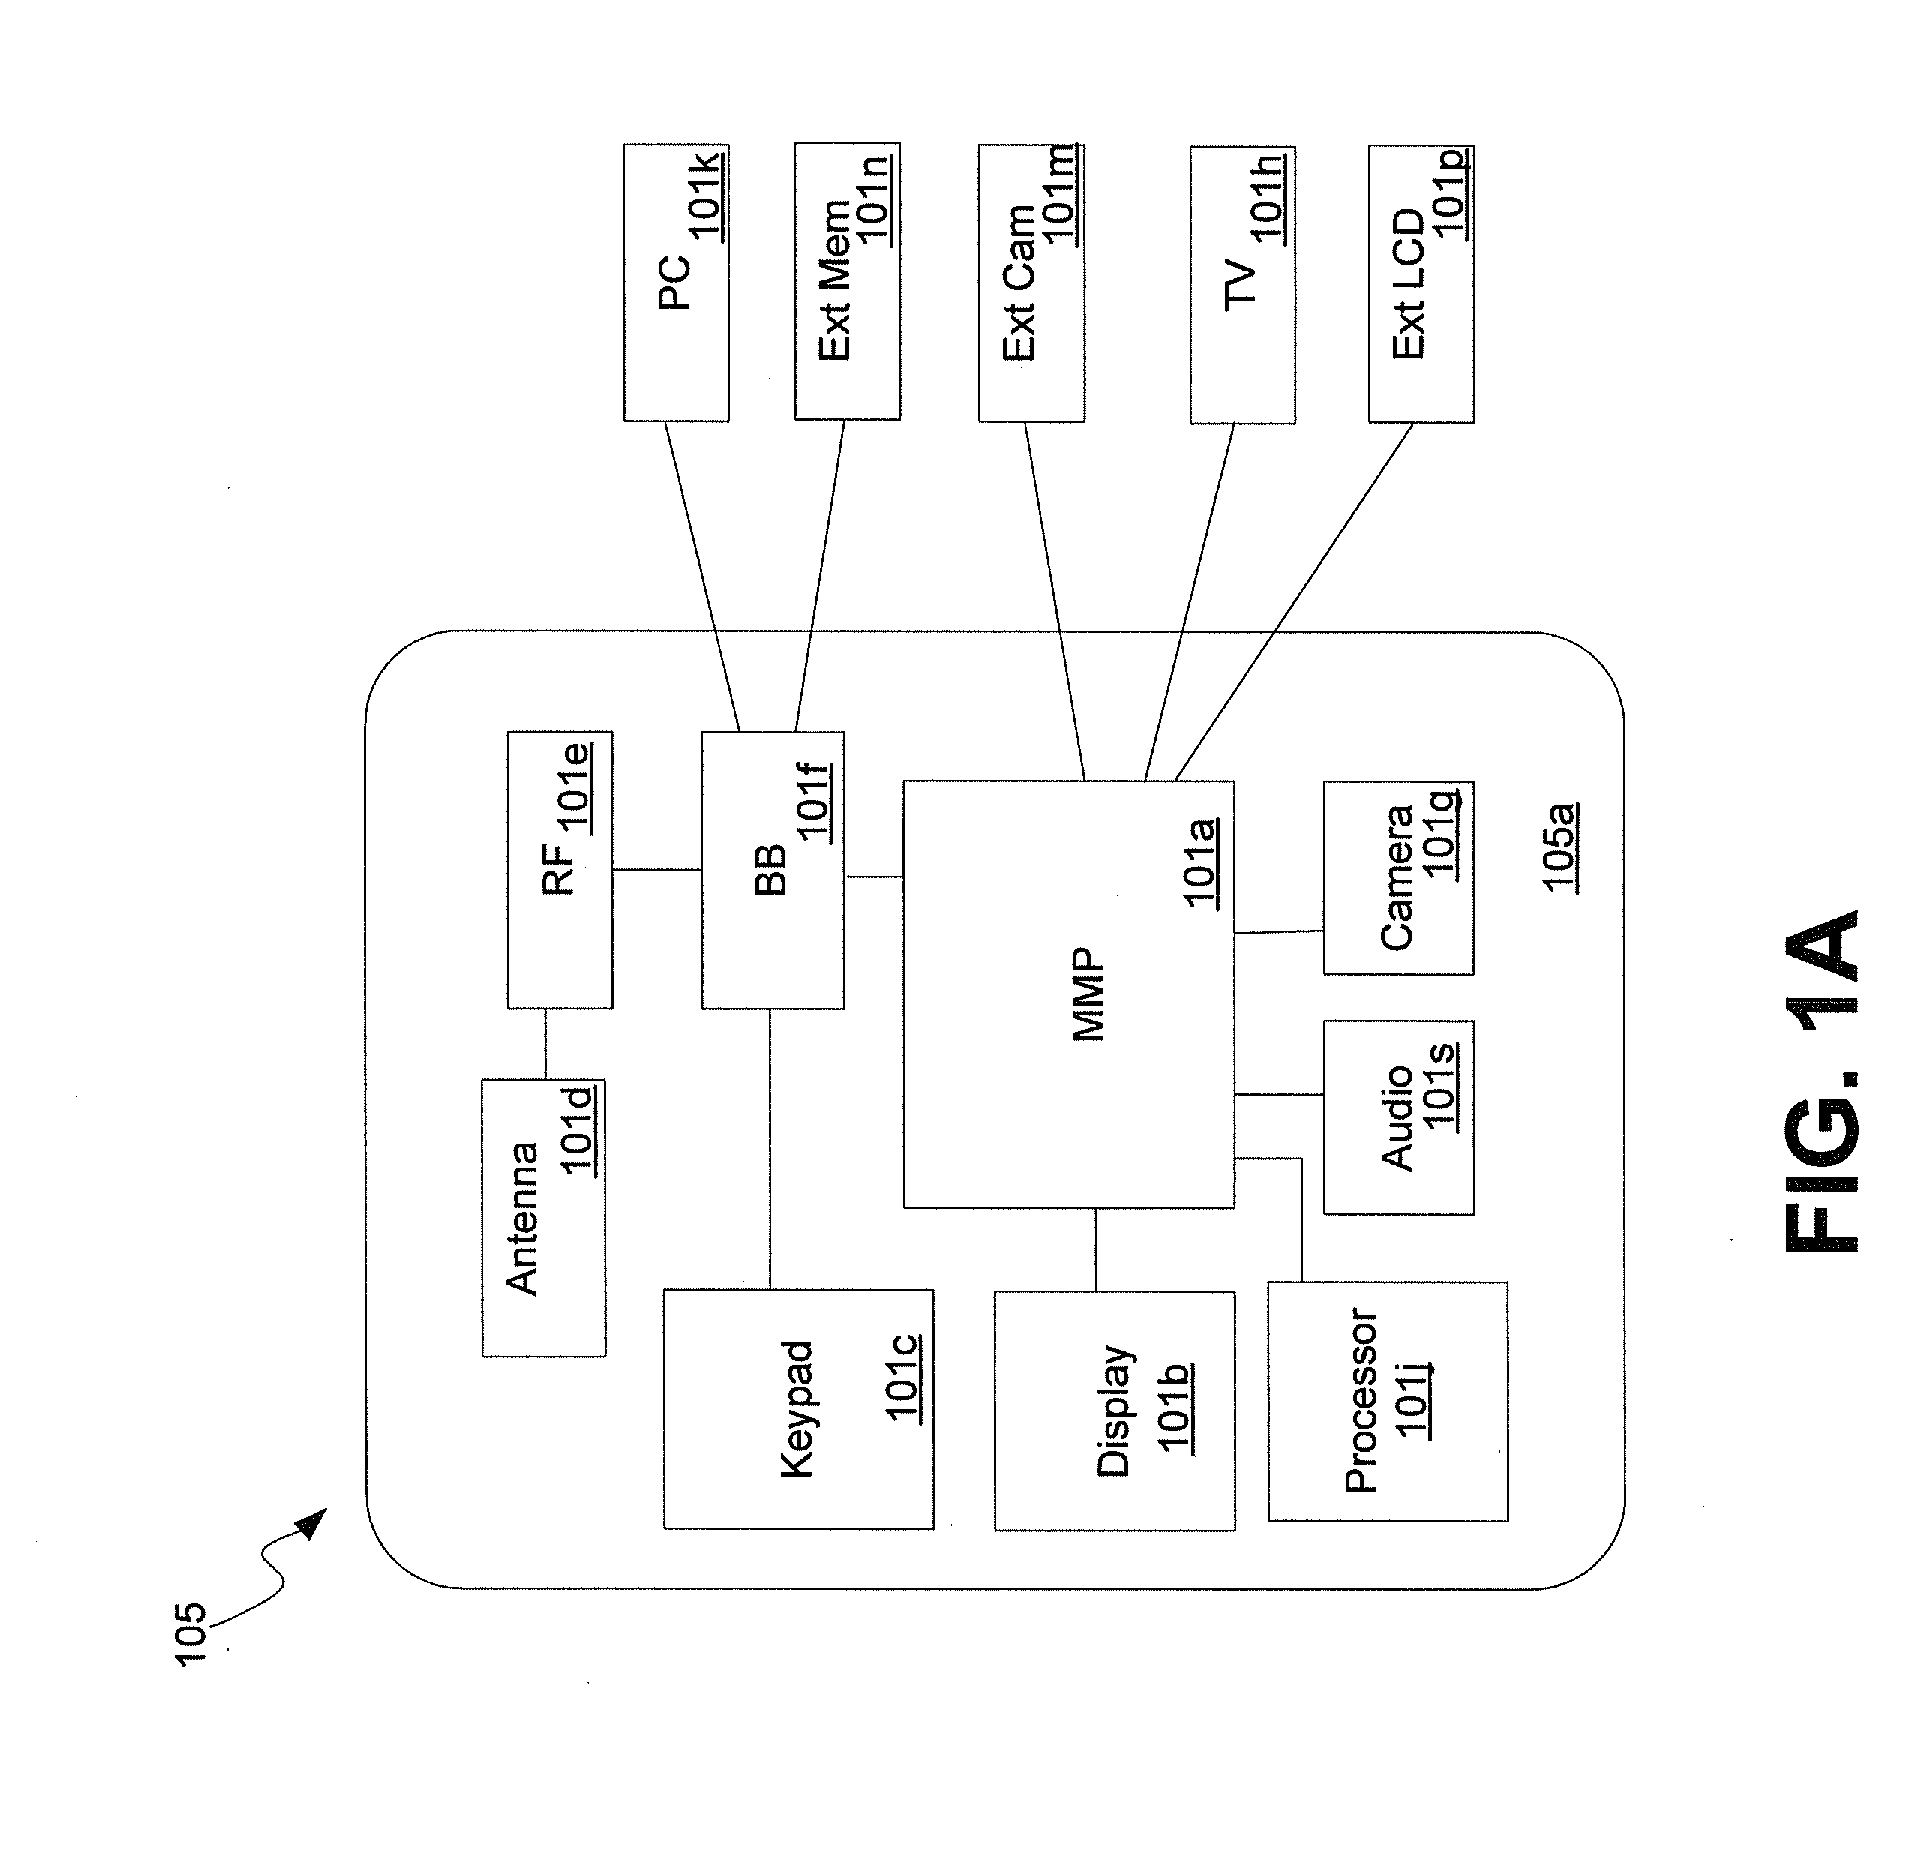 Method and System For Suspending Video Processor and Saving Processor State in SDRAM Utilizing a Core Processor